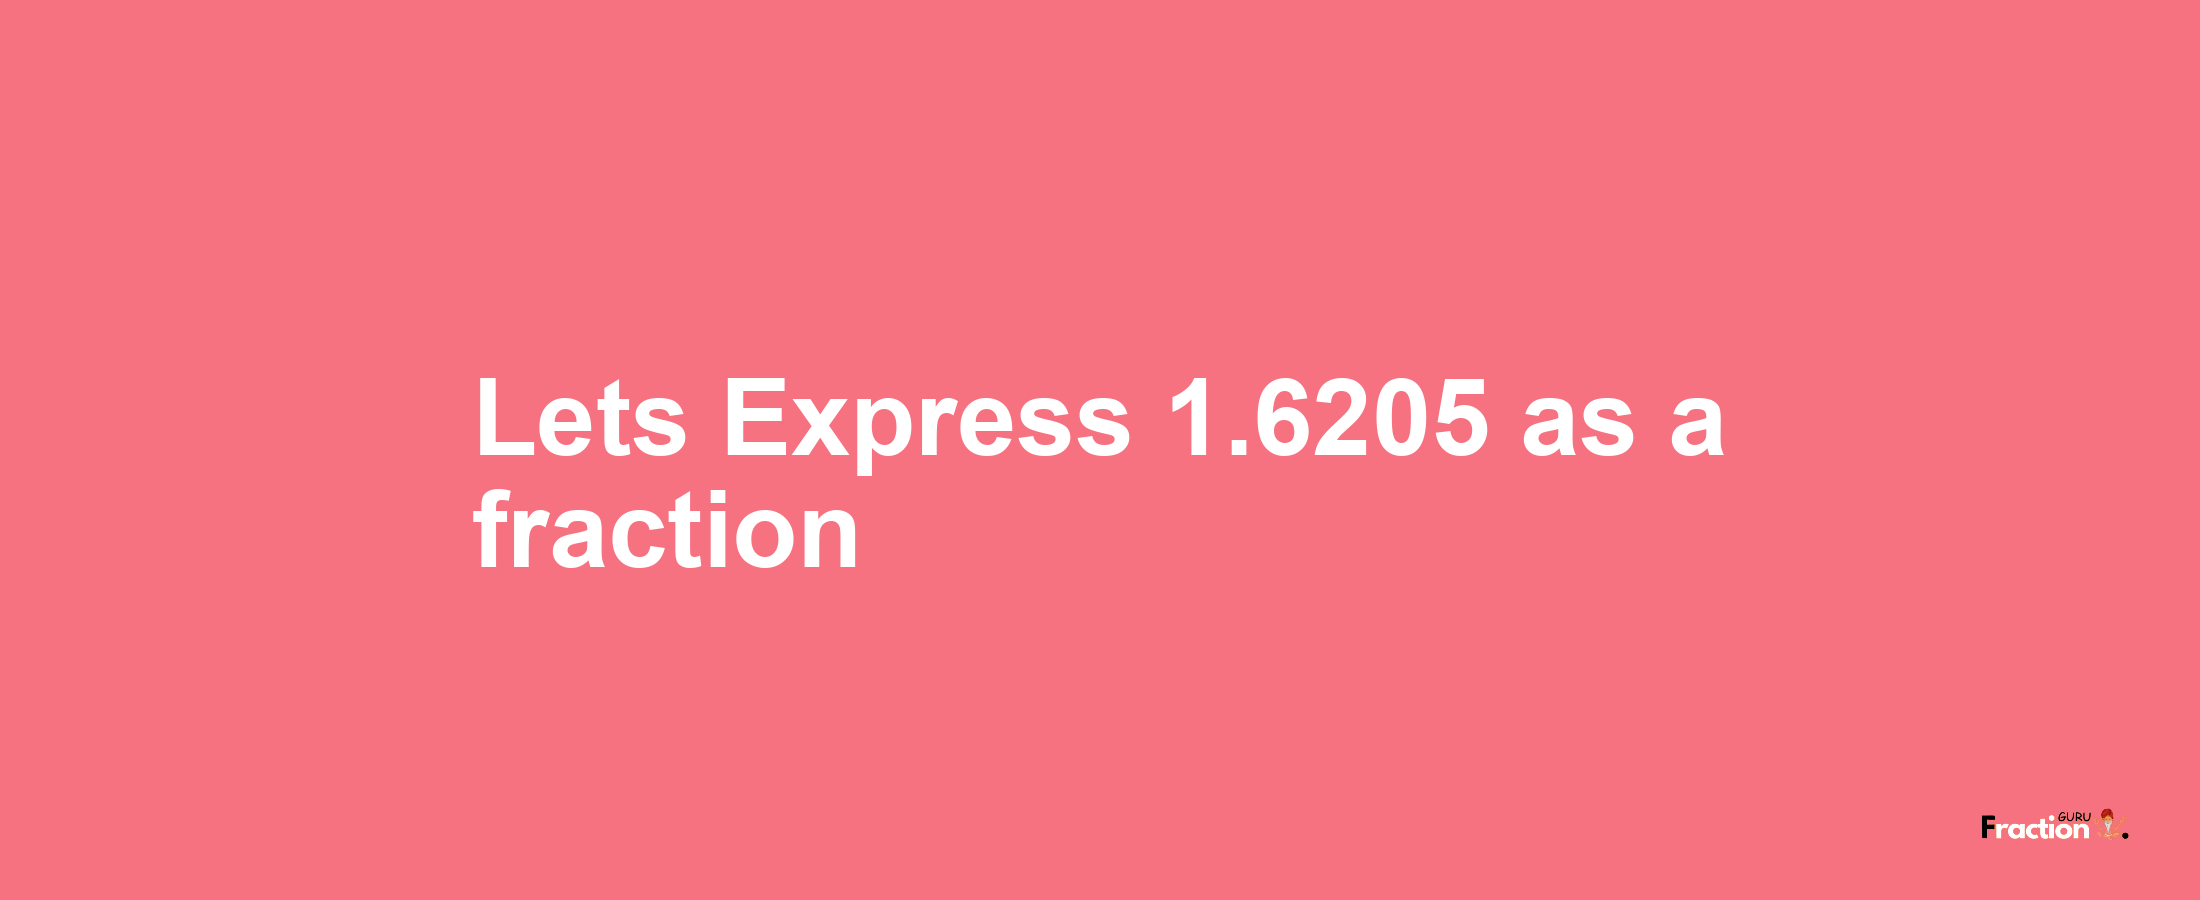 Lets Express 1.6205 as afraction